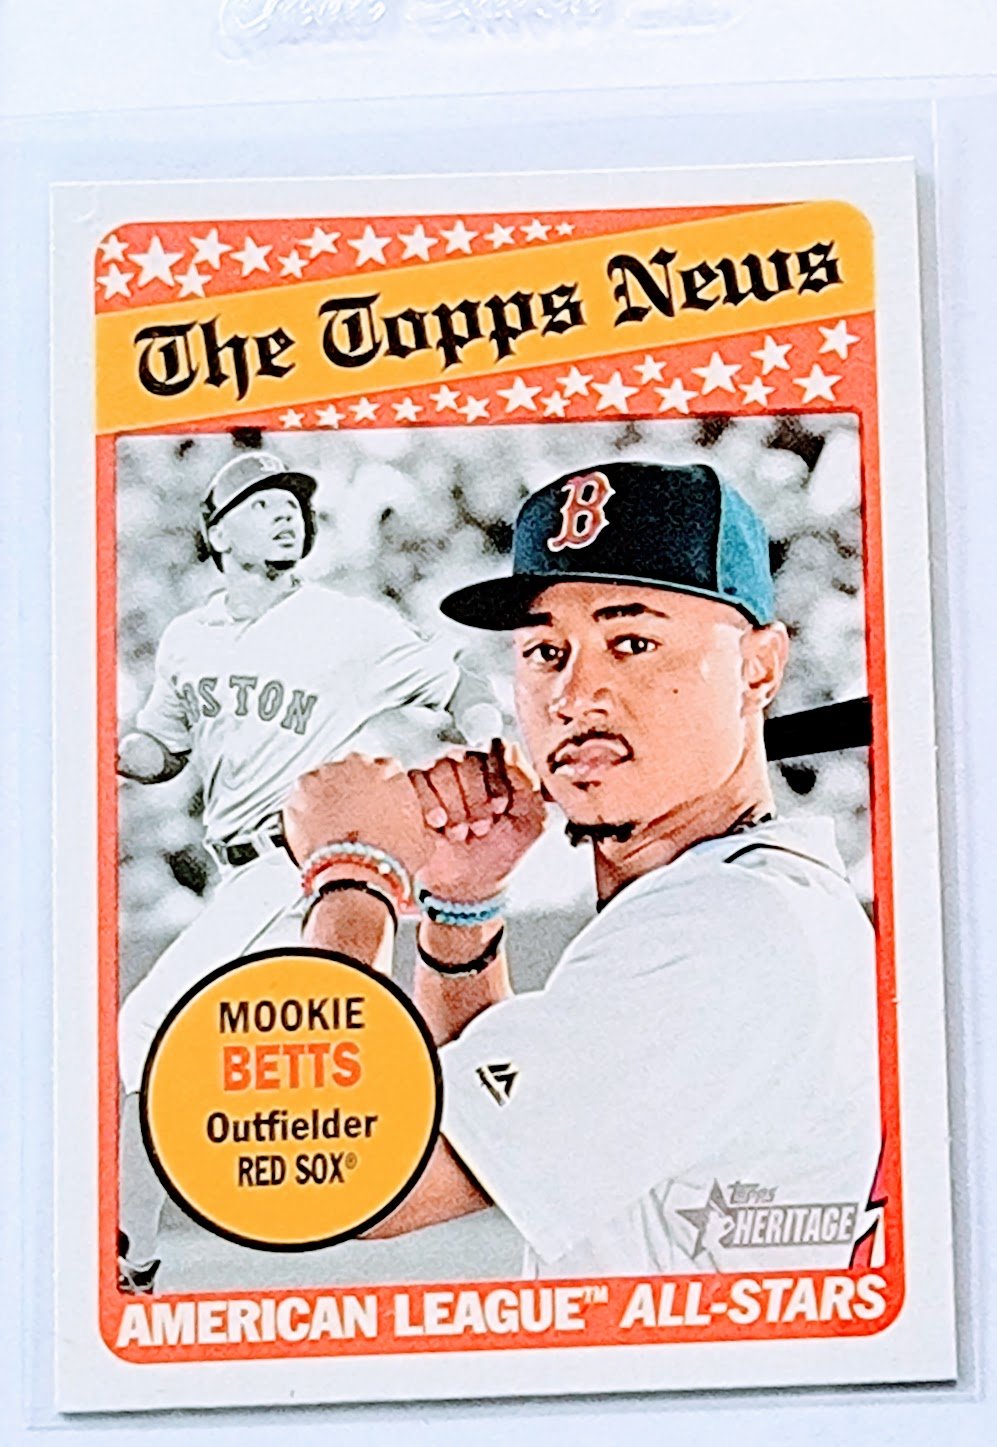 2018 Topps Heritage Mookie Betts The Topps News AL All Stars Insert Baseball Trading Card TPTV simple Xclusive Collectibles   